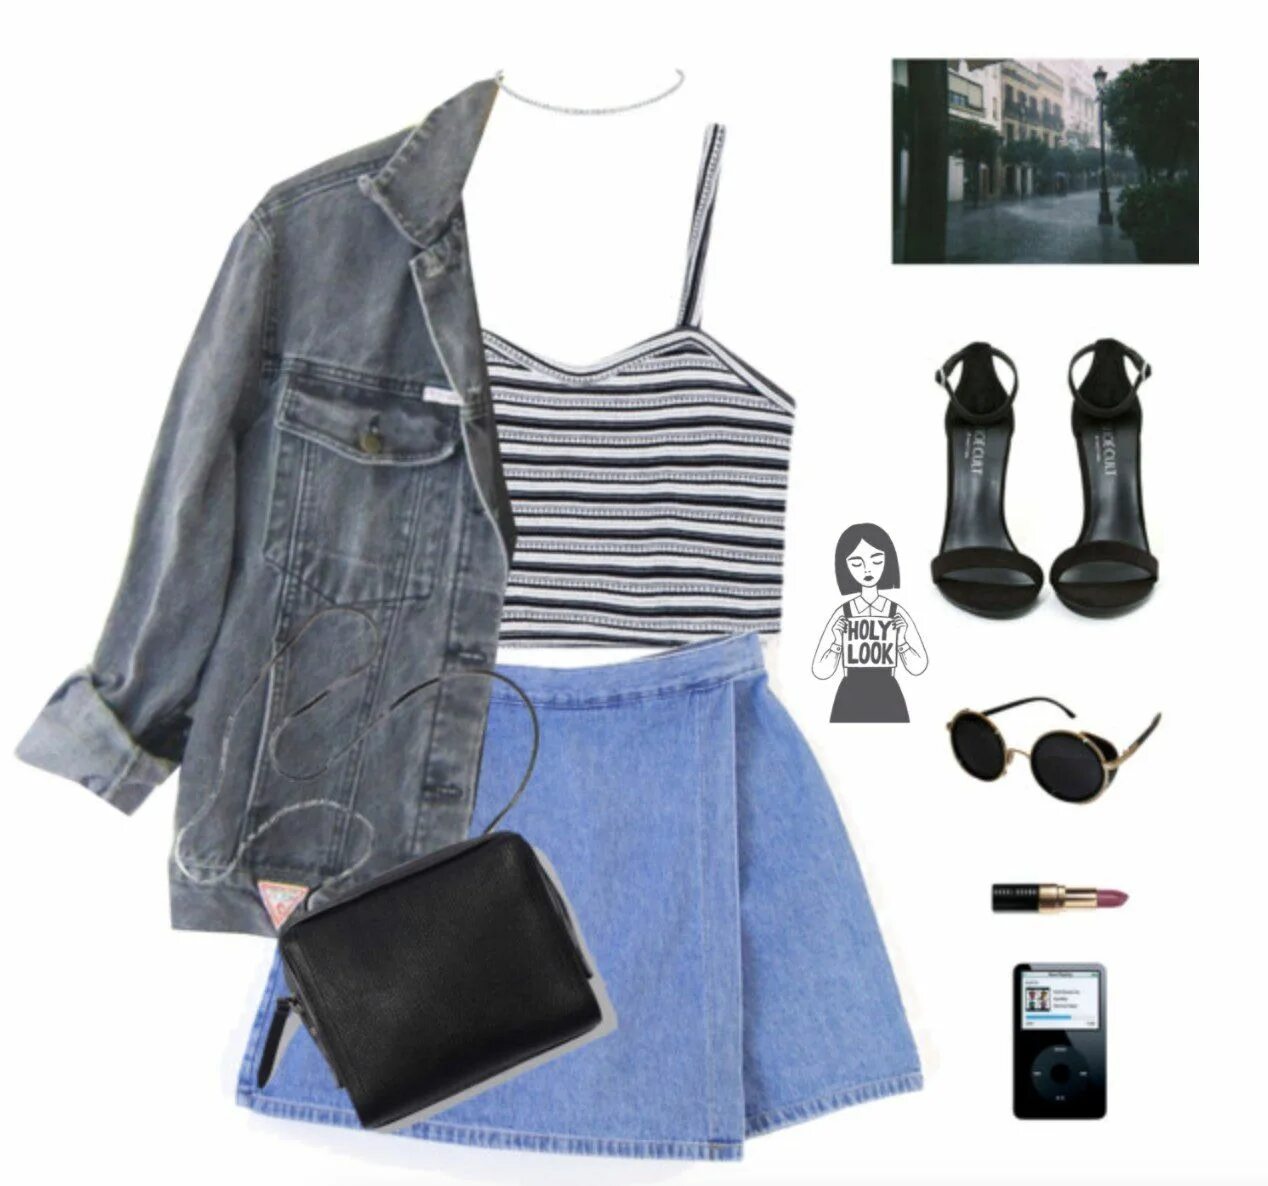 Look topic. Сеты одежды Holy look. Коллаж look с ценой. Polyvore outfits плохая девочка. Holy outfit.